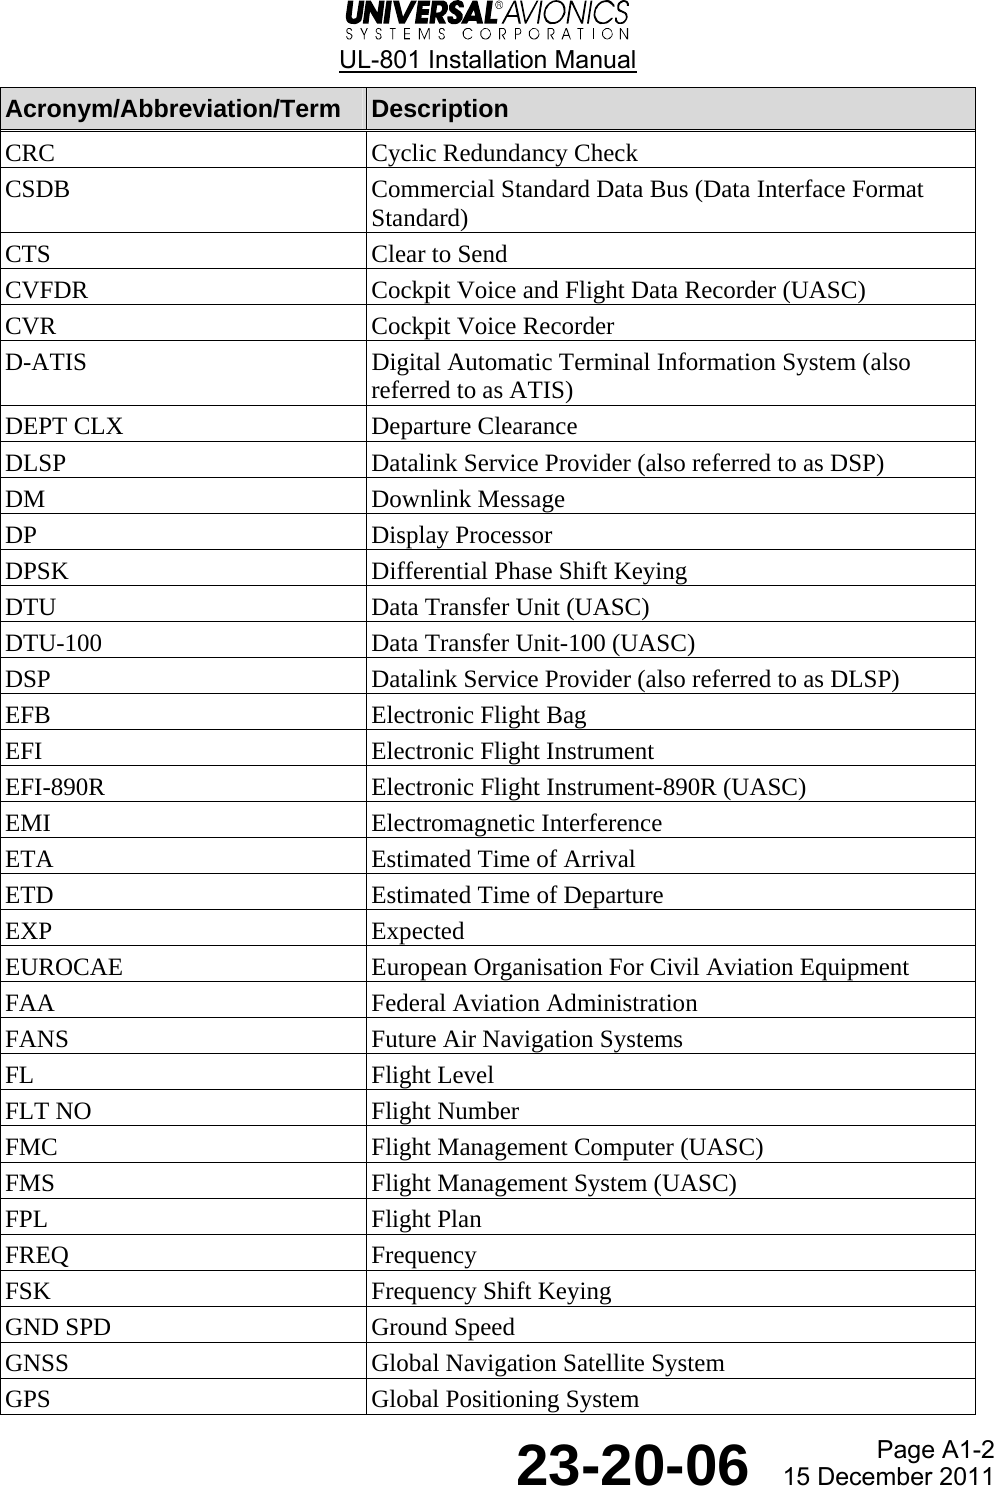  UL-801 Installation Manual  Page A1-2  23-20-06  15 December 2011 Acronym/Abbreviation/Term  Description CRC  Cyclic Redundancy Check CSDB  Commercial Standard Data Bus (Data Interface Format Standard) CTS  Clear to Send CVFDR  Cockpit Voice and Flight Data Recorder (UASC) CVR  Cockpit Voice Recorder D-ATIS  Digital Automatic Terminal Information System (also referred to as ATIS) DEPT CLX  Departure Clearance DLSP  Datalink Service Provider (also referred to as DSP) DM Downlink Message DP Display Processor DPSK  Differential Phase Shift Keying DTU  Data Transfer Unit (UASC) DTU-100  Data Transfer Unit-100 (UASC) DSP  Datalink Service Provider (also referred to as DLSP) EFB  Electronic Flight Bag EFI Electronic Flight Instrument EFI-890R Electronic Flight Instrument-890R (UASC) EMI Electromagnetic Interference ETA  Estimated Time of Arrival ETD  Estimated Time of Departure EXP Expected EUROCAE European Organisation For Civil Aviation Equipment FAA  Federal Aviation Administration FANS  Future Air Navigation Systems FL Flight Level FLT NO  Flight Number FMC Flight Management Computer (UASC) FMS  Flight Management System (UASC) FPL Flight Plan FREQ Frequency FSK  Frequency Shift Keying GND SPD  Ground Speed GNSS  Global Navigation Satellite System GPS  Global Positioning System 